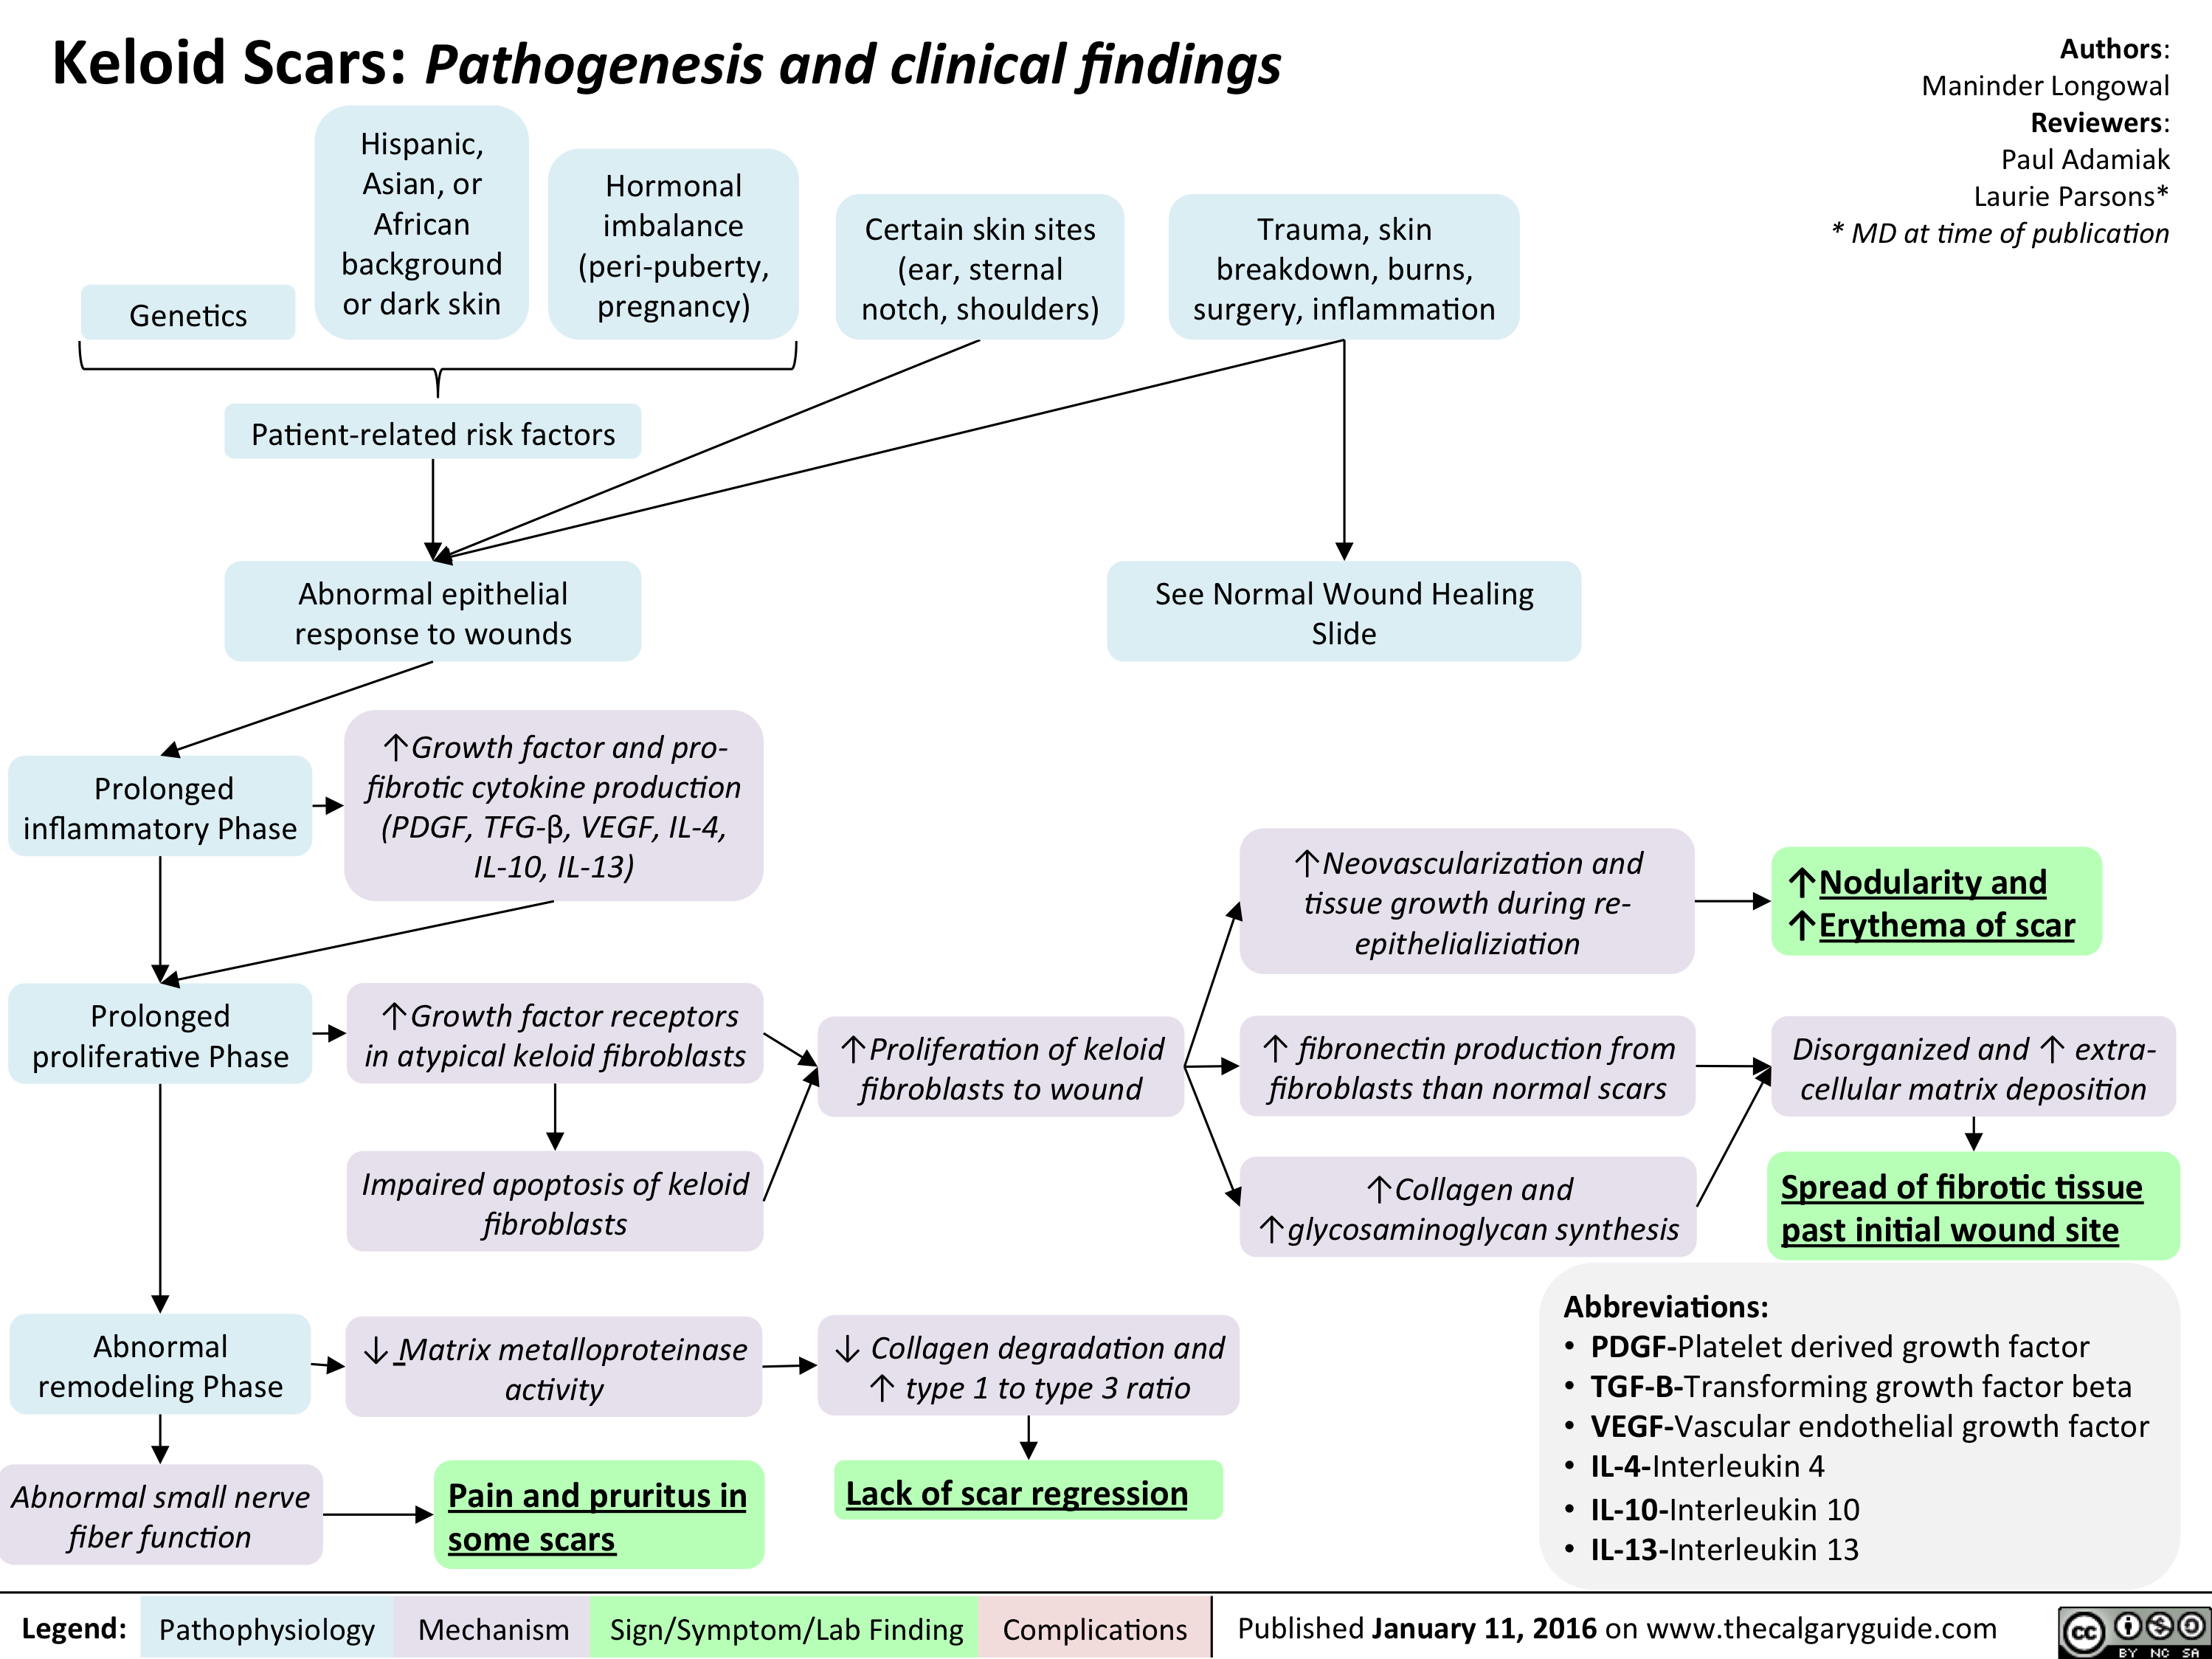 Keloid scar - pathogenesis and clinical findings